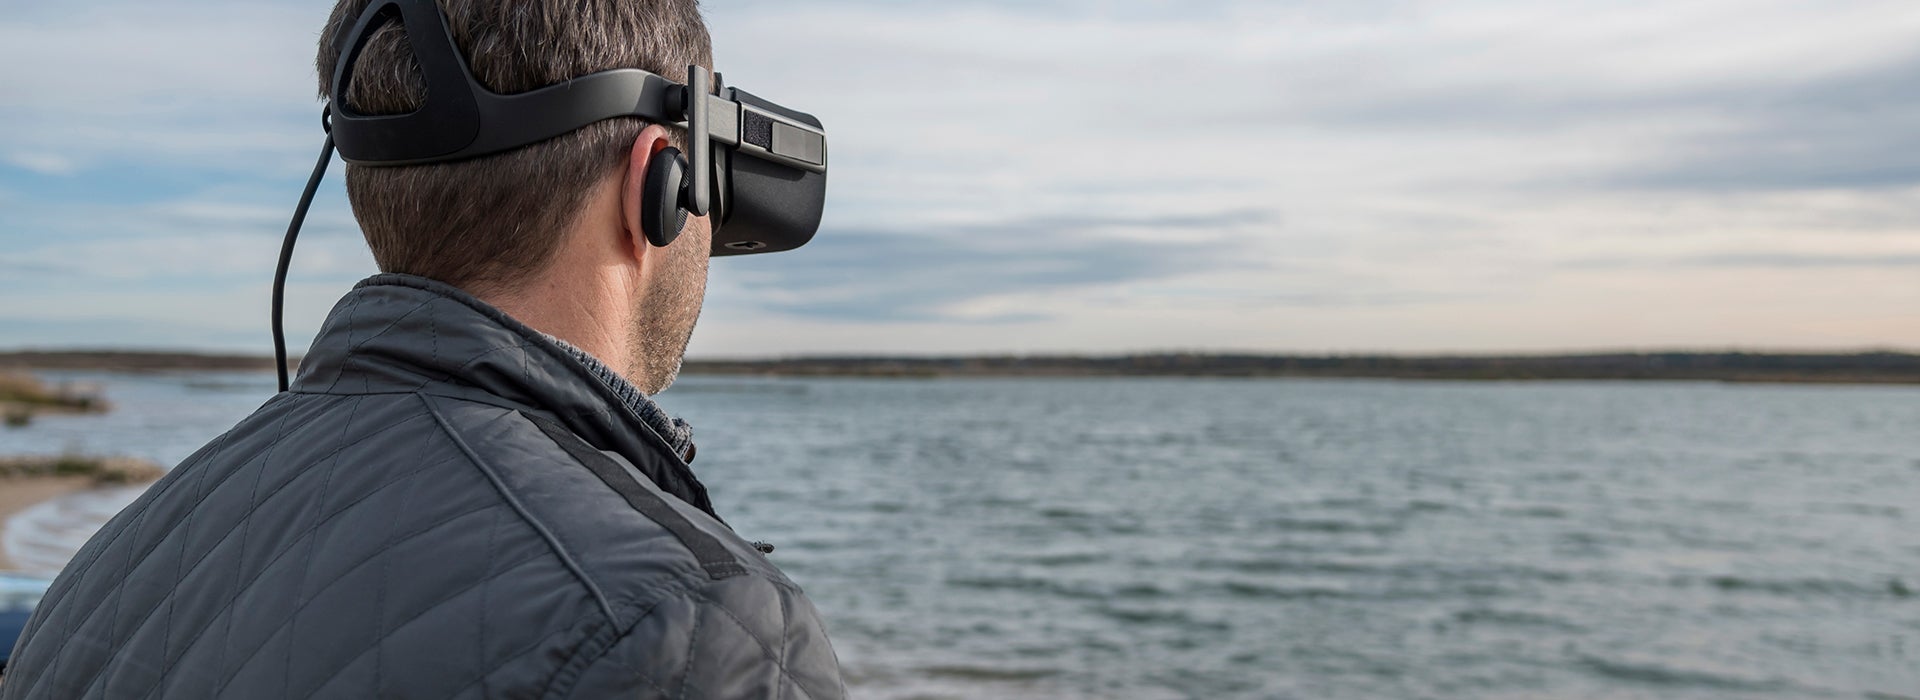 A man looks across the water wearing a VR headset